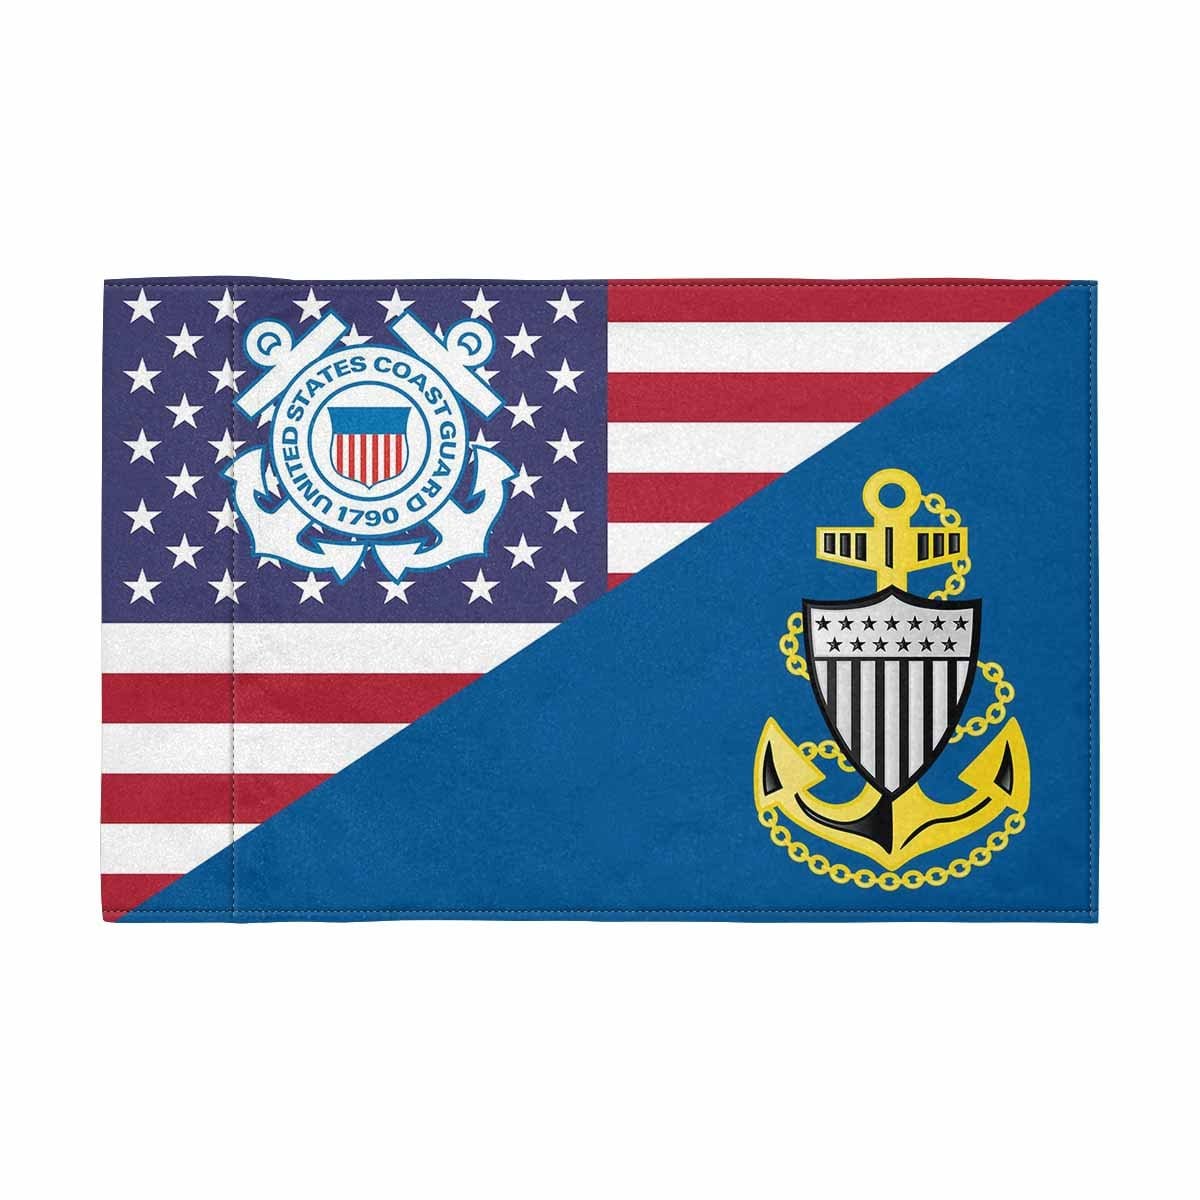 US Coast Guard E-7 Collar Device Motorcycle Flag 9" x 6" Twin-Side Printing D01-MotorcycleFlag-USCG-Veterans Nation